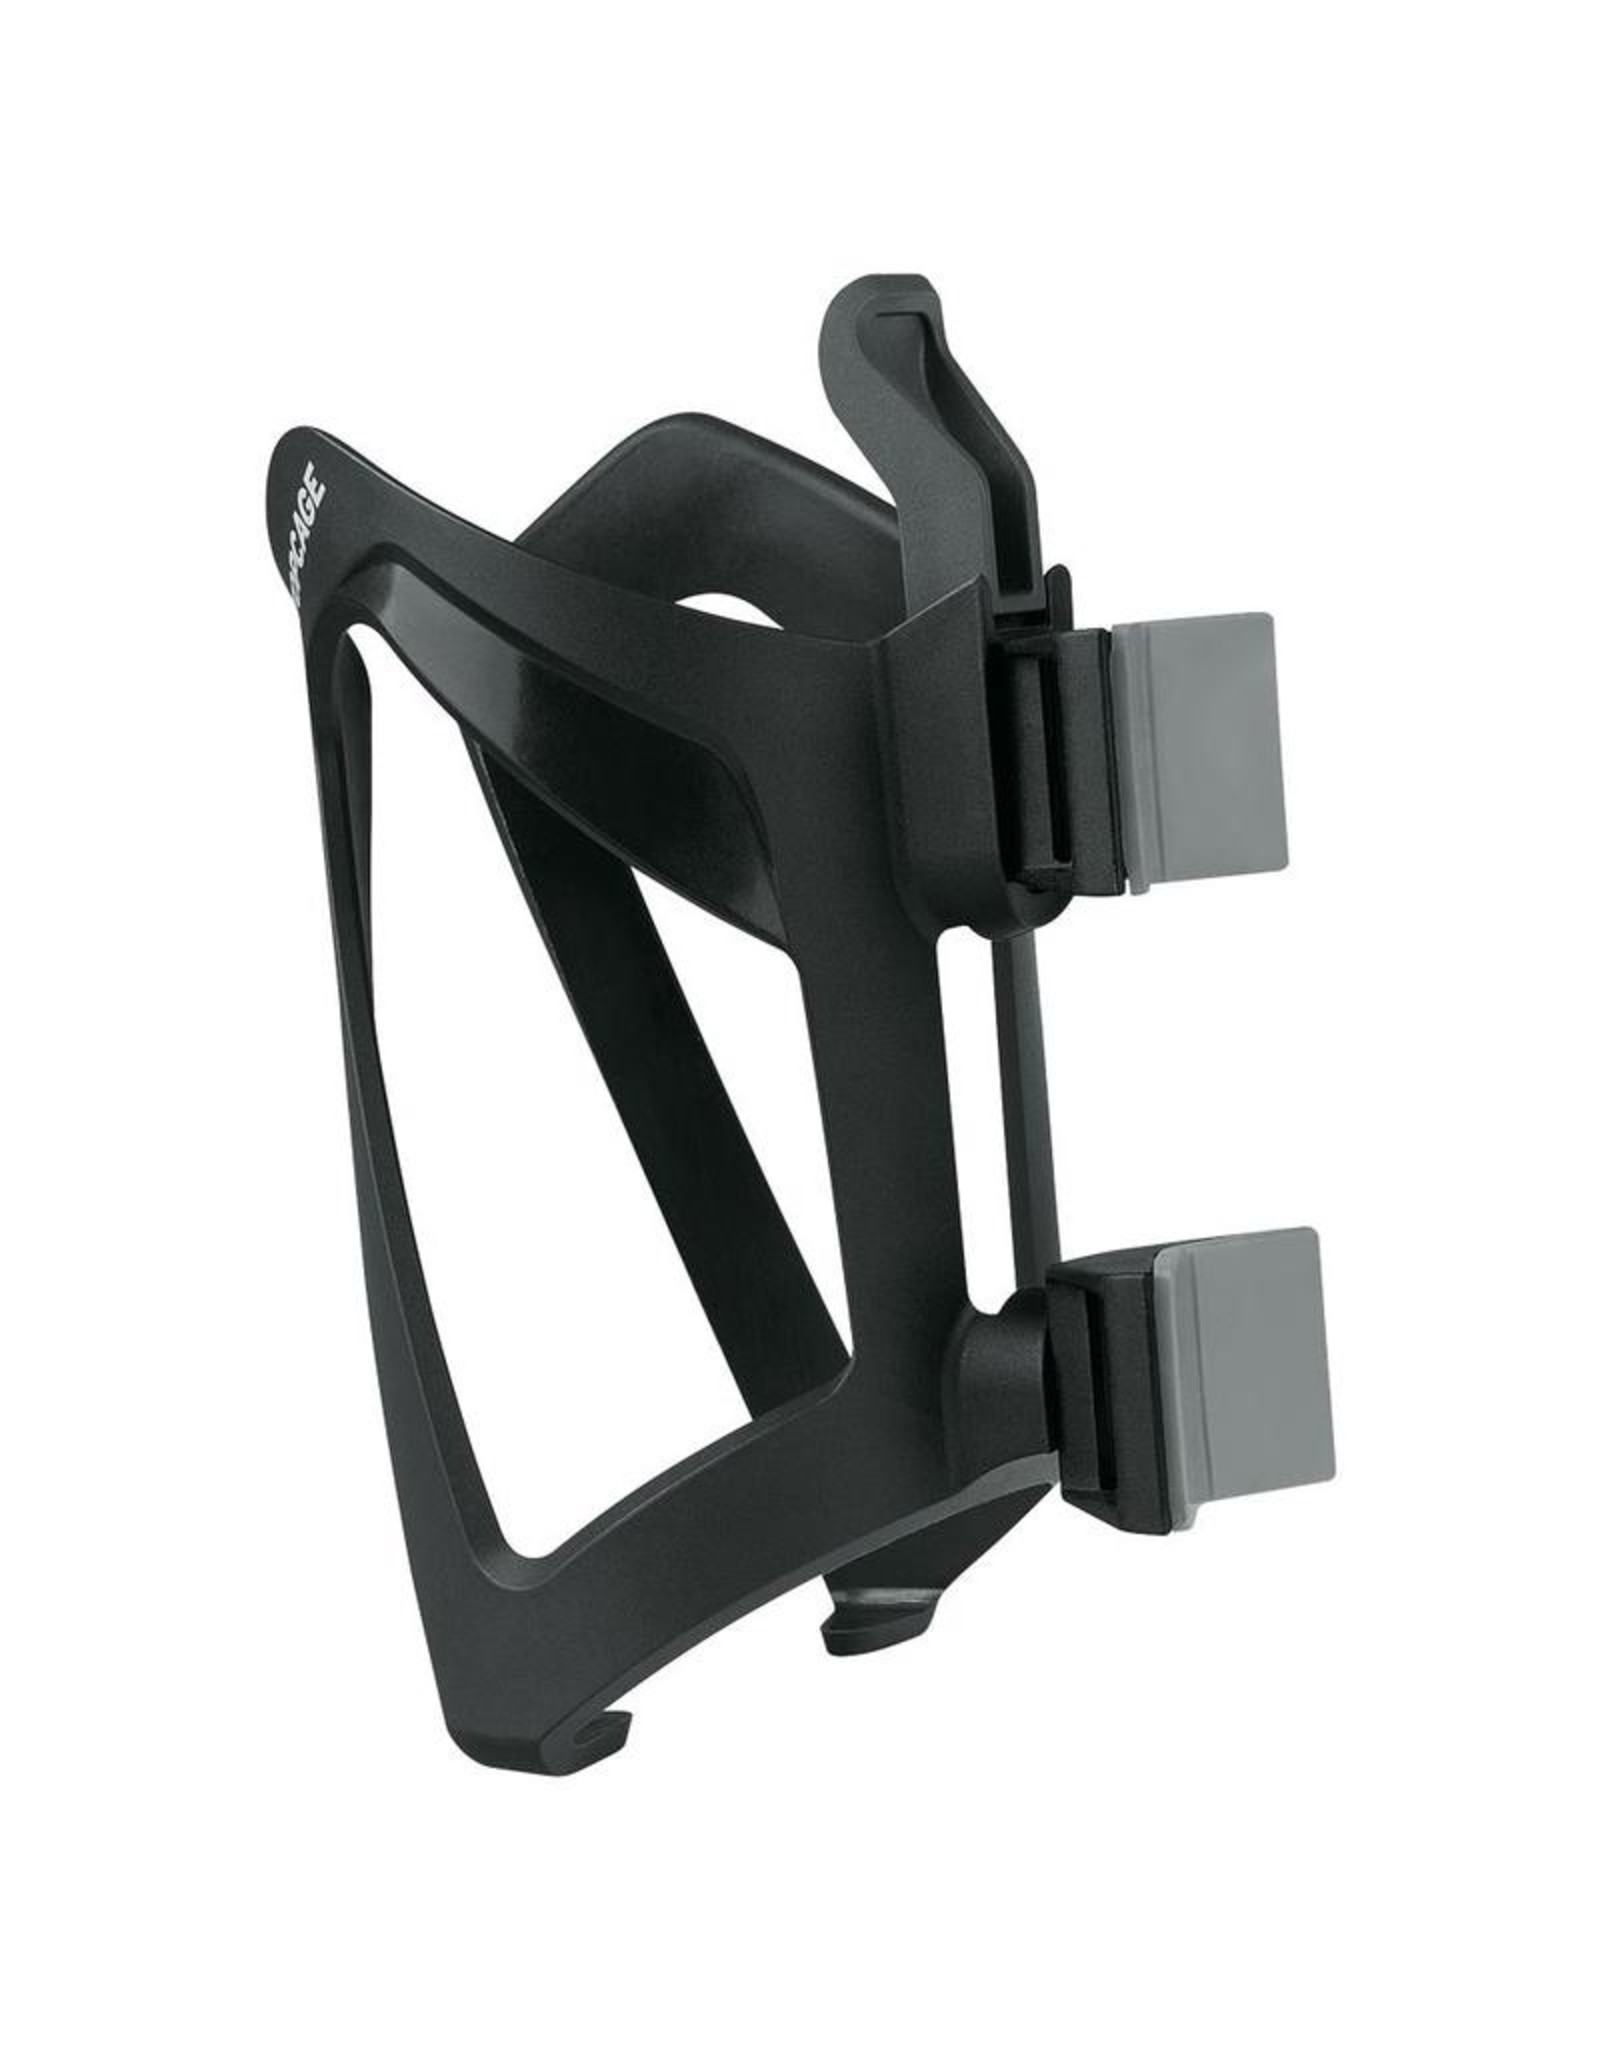 SKS SKS Anywhere Topcage Waterbottle Cage, Black /each